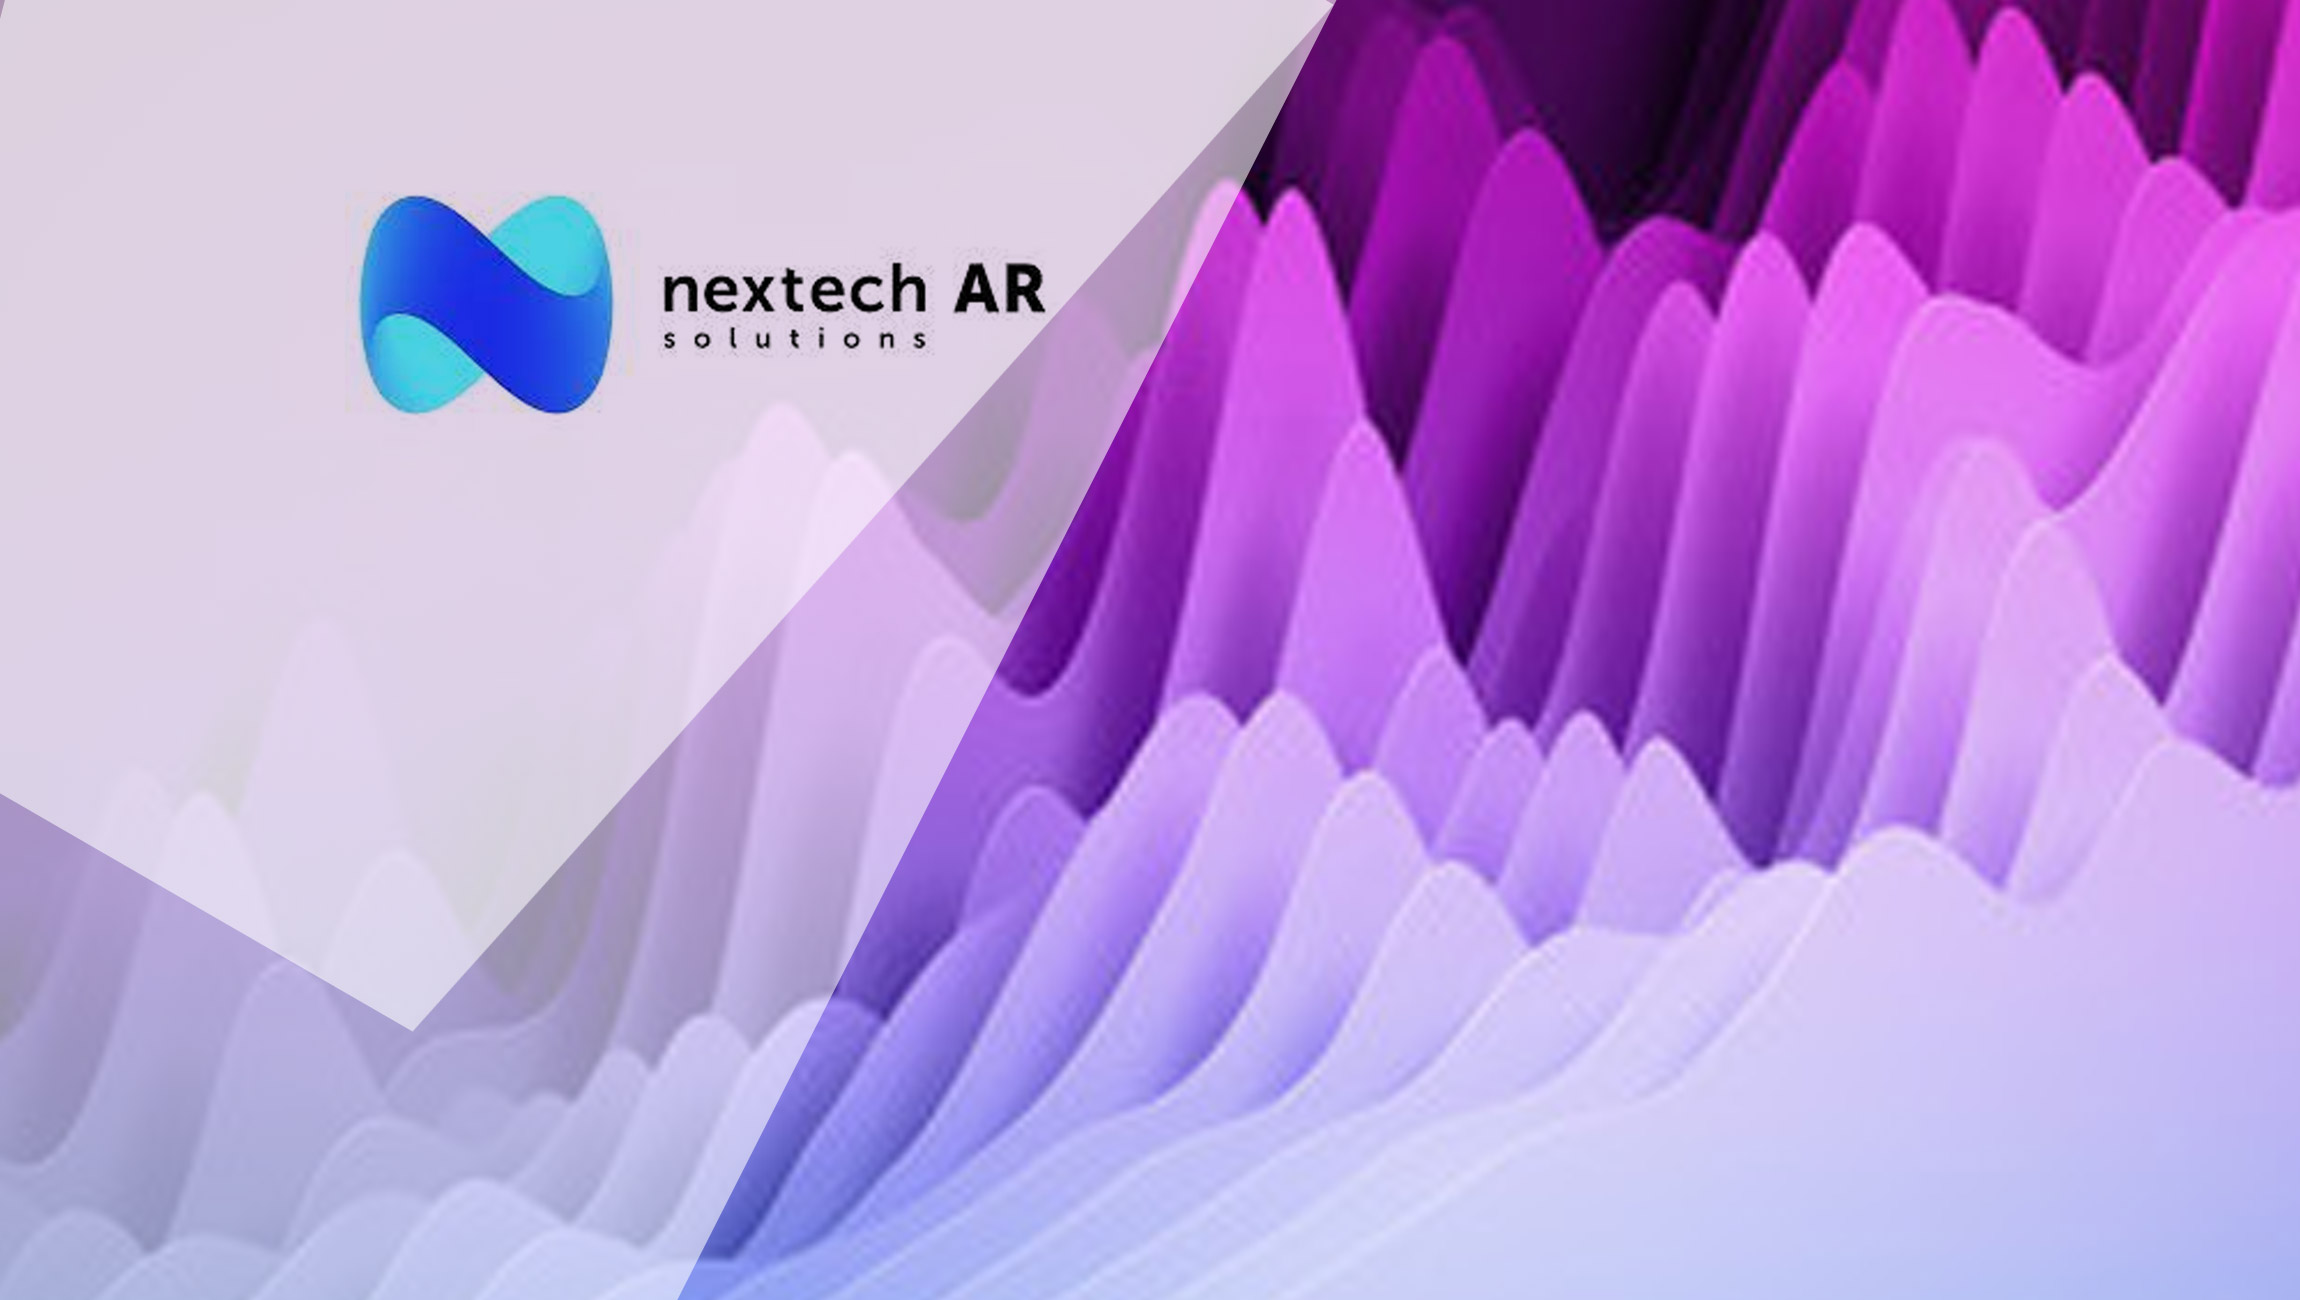 Nextech-AR-Sees-Demand-For-Its-3D-Models-Rapidly-Growing-As-It-Signs-Deals-Across-A-Wide-Spectrum-of-Industries